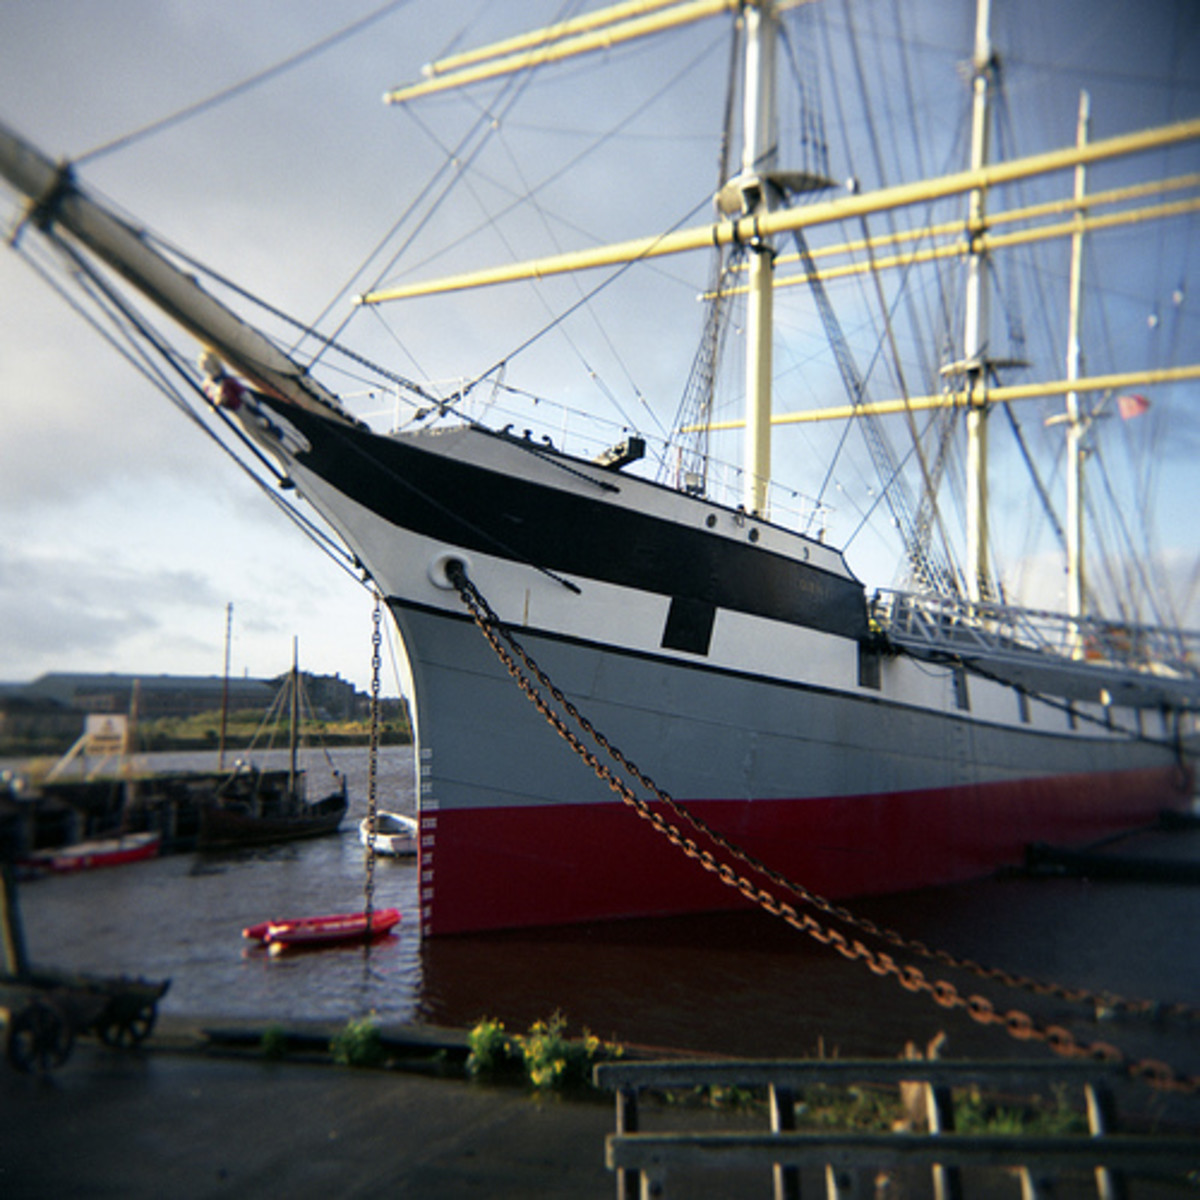 The History of Clyde Shipbuilding: The 19th Century Atlantic Race and American Competition